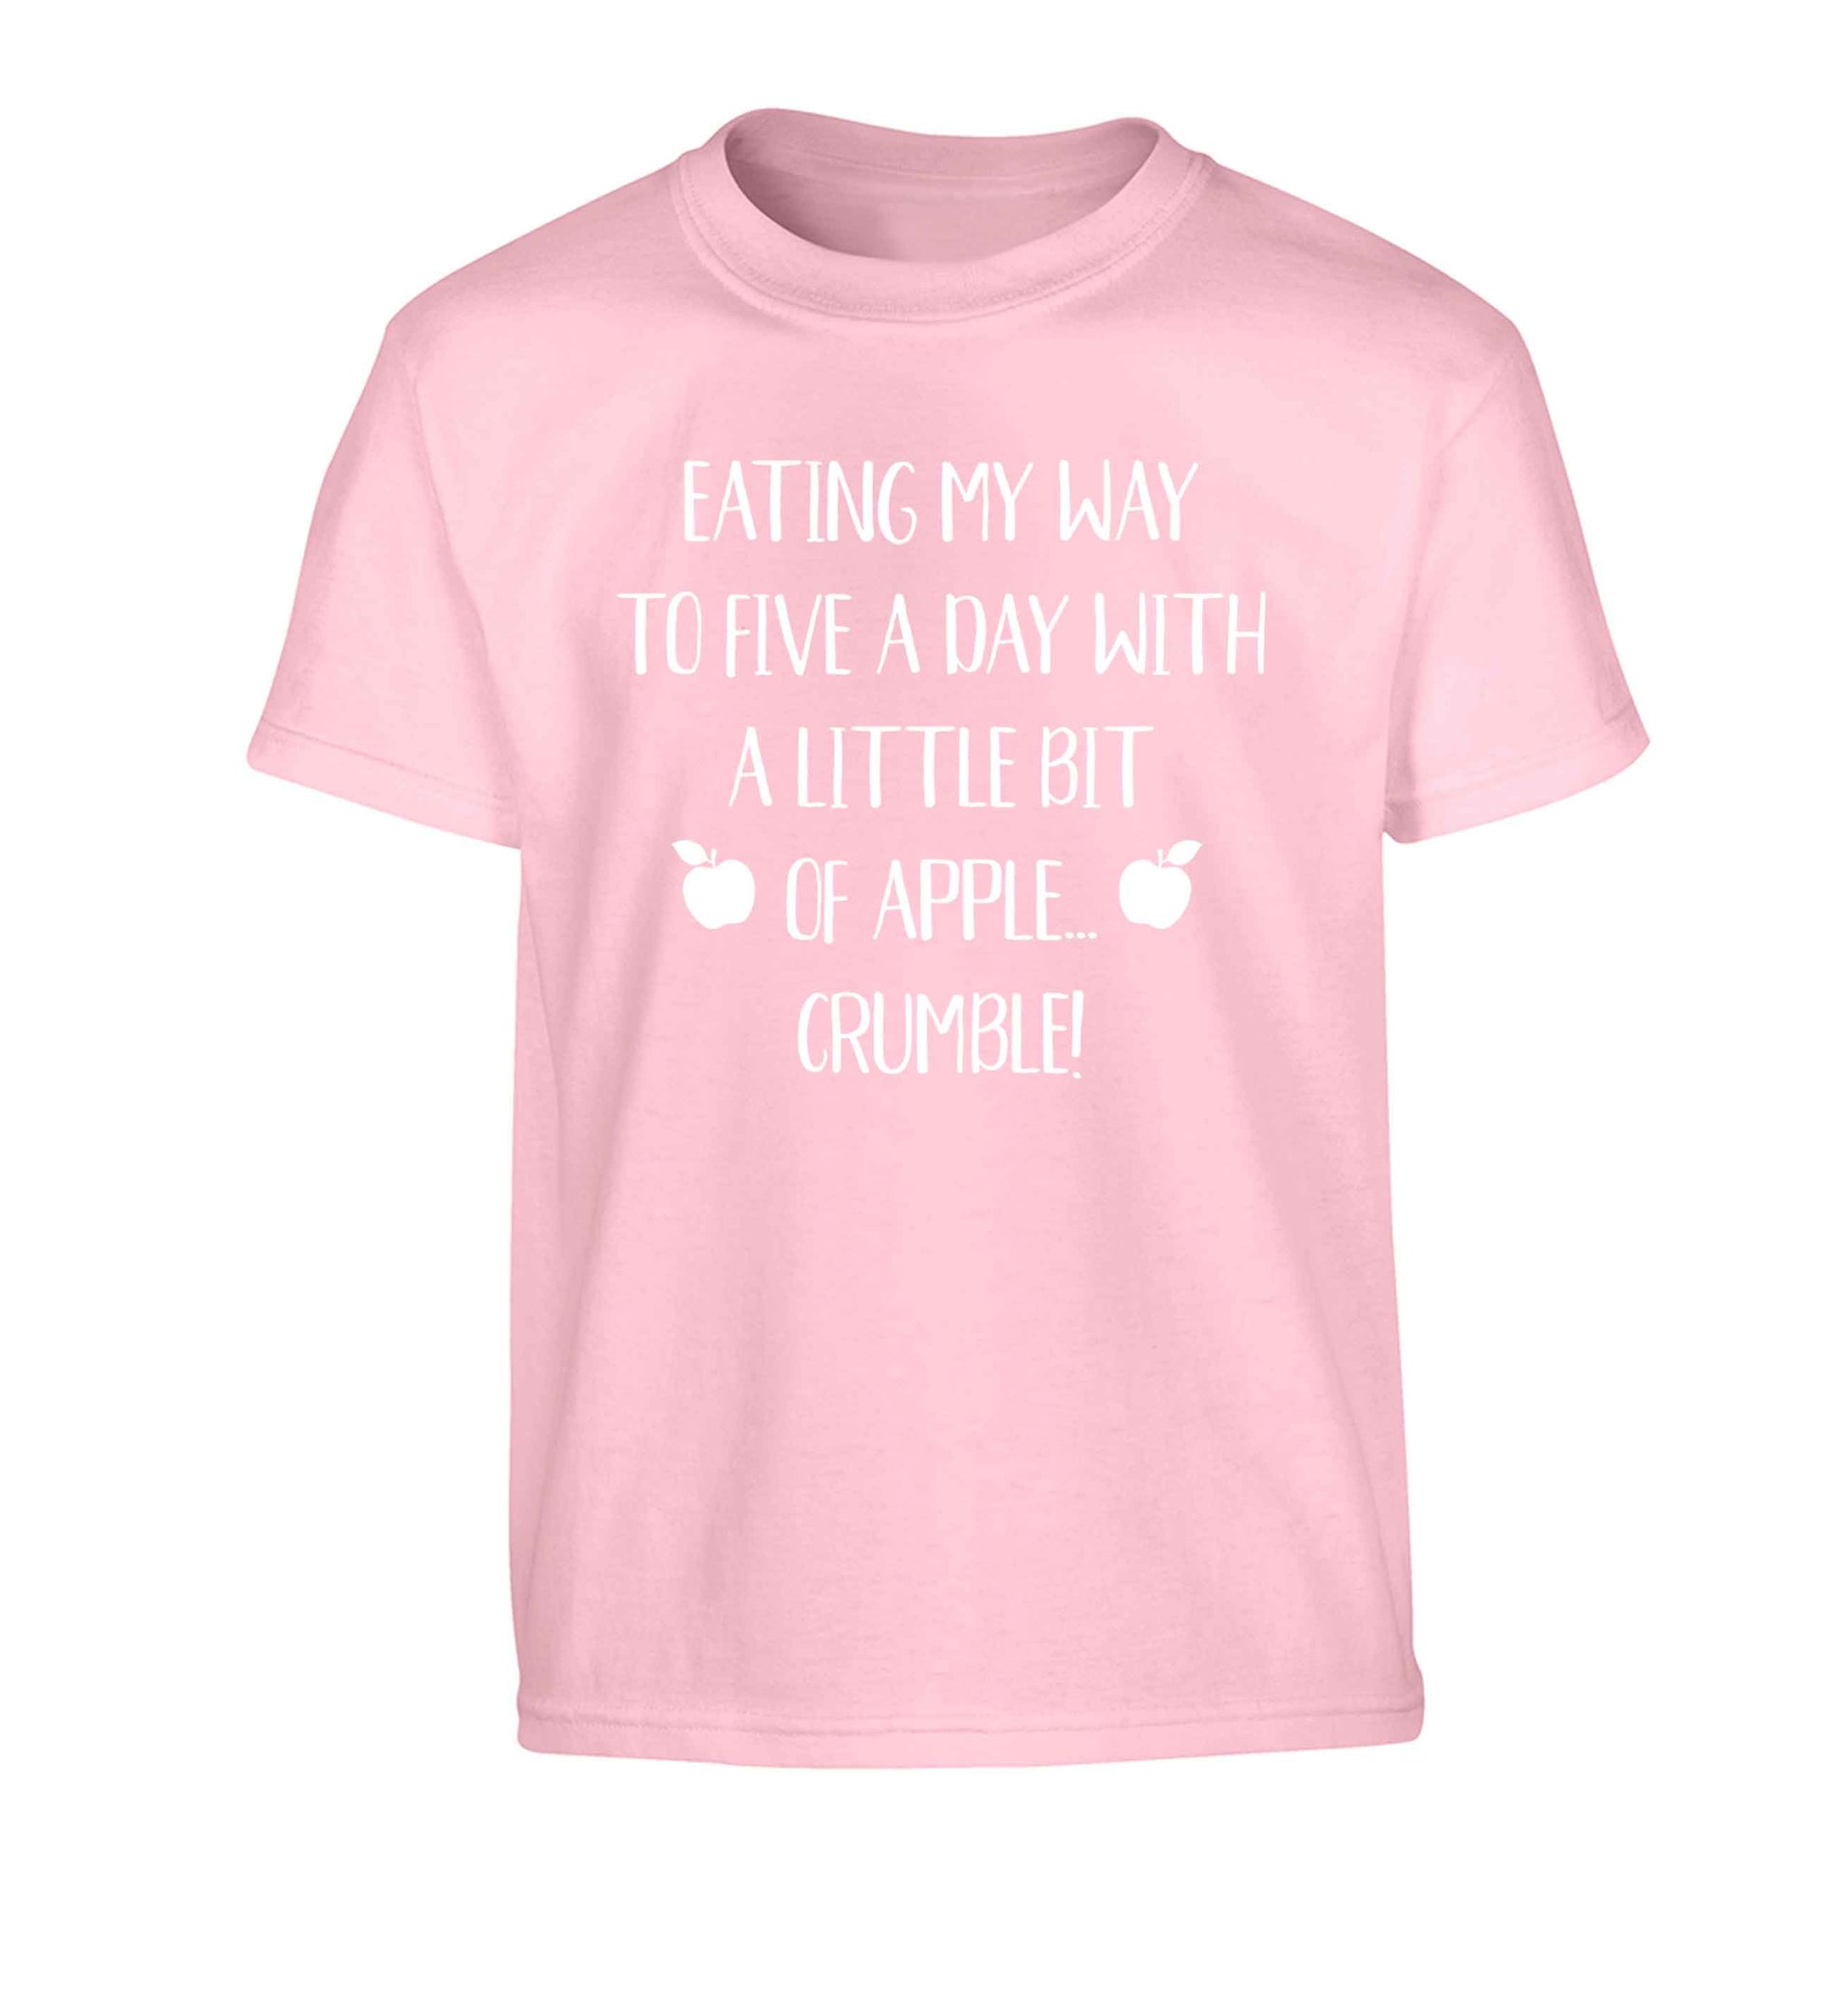 Eating my way to five a day with a little bit of apple crumble Children's light pink Tshirt 12-13 Years